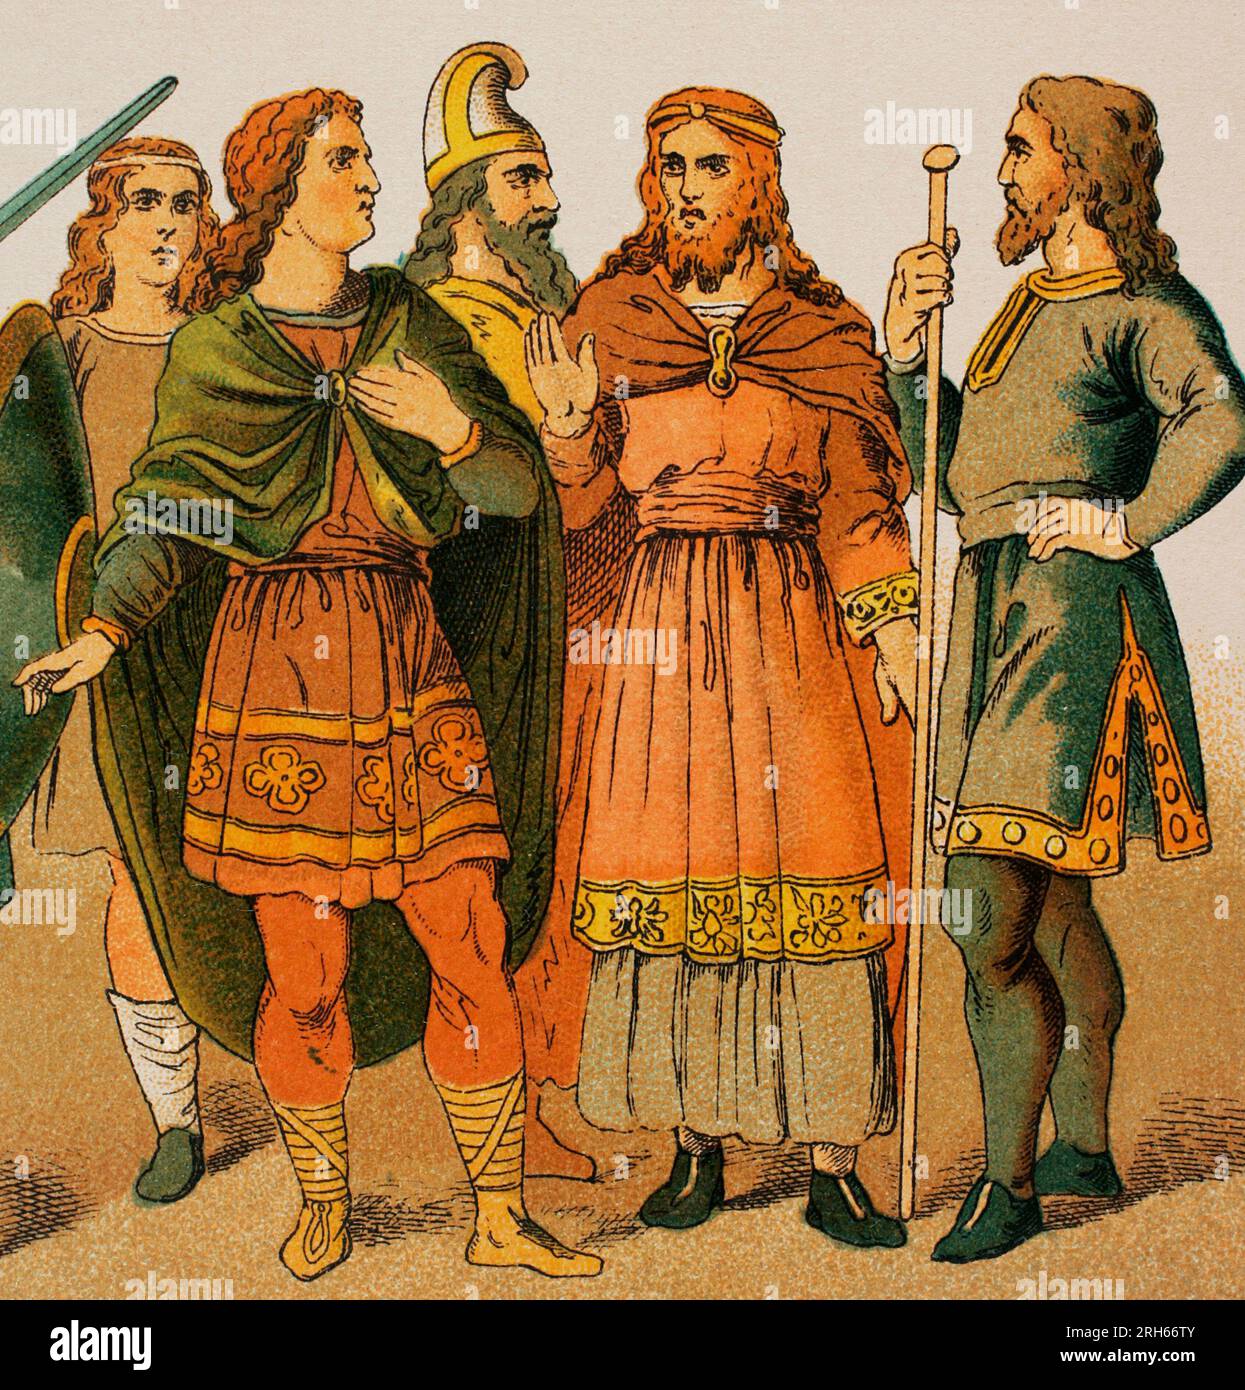 Anglo-Saxons (500-1000). Nobles. Chromolithography. 'Historia Universal' (Universal History), by Cesar Cantu. Volume IV. Published in Barcelona, 1881. Stock Photo